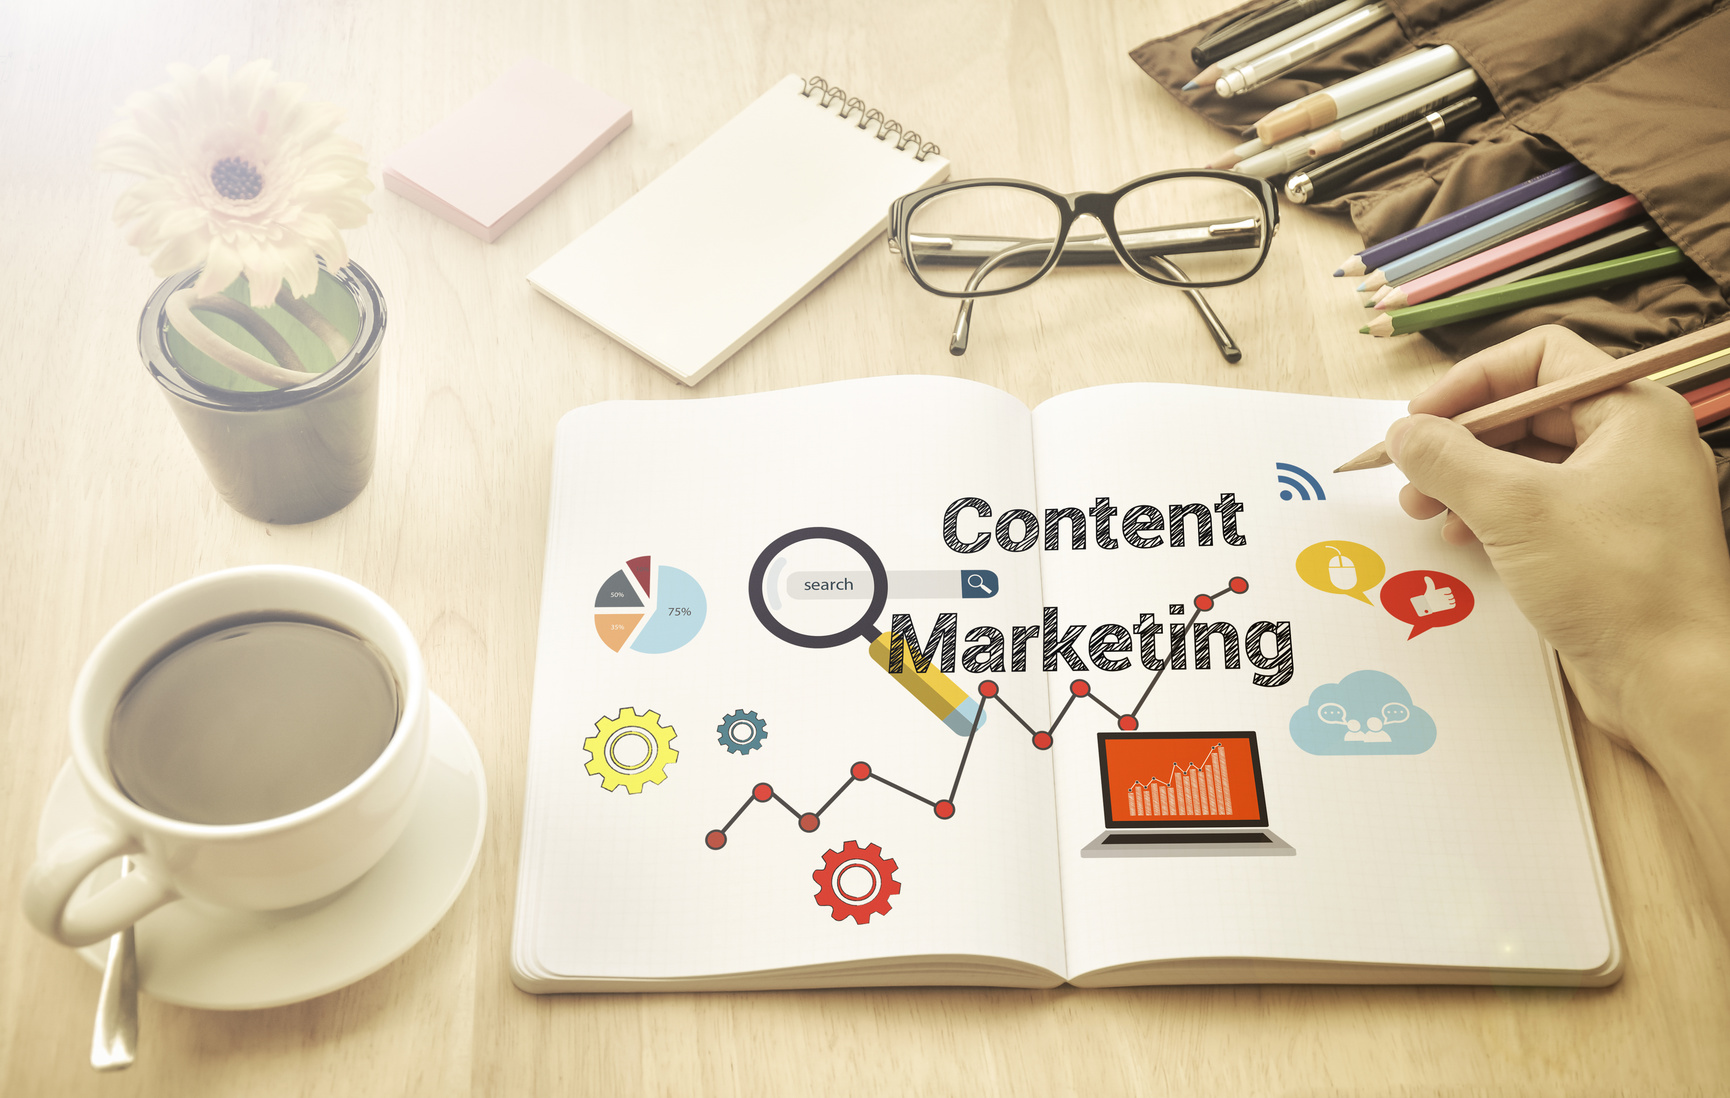 You start your day with coffee, yoga, meditation and other rituals that are essential to your well being. But what about your content marketing?

Here are 7 daily rituals to follow for better content marketing results.
1. Check Your Content Calendar
Effective content marketers include consistency into their daily rituals. You need to… Continue Reading…